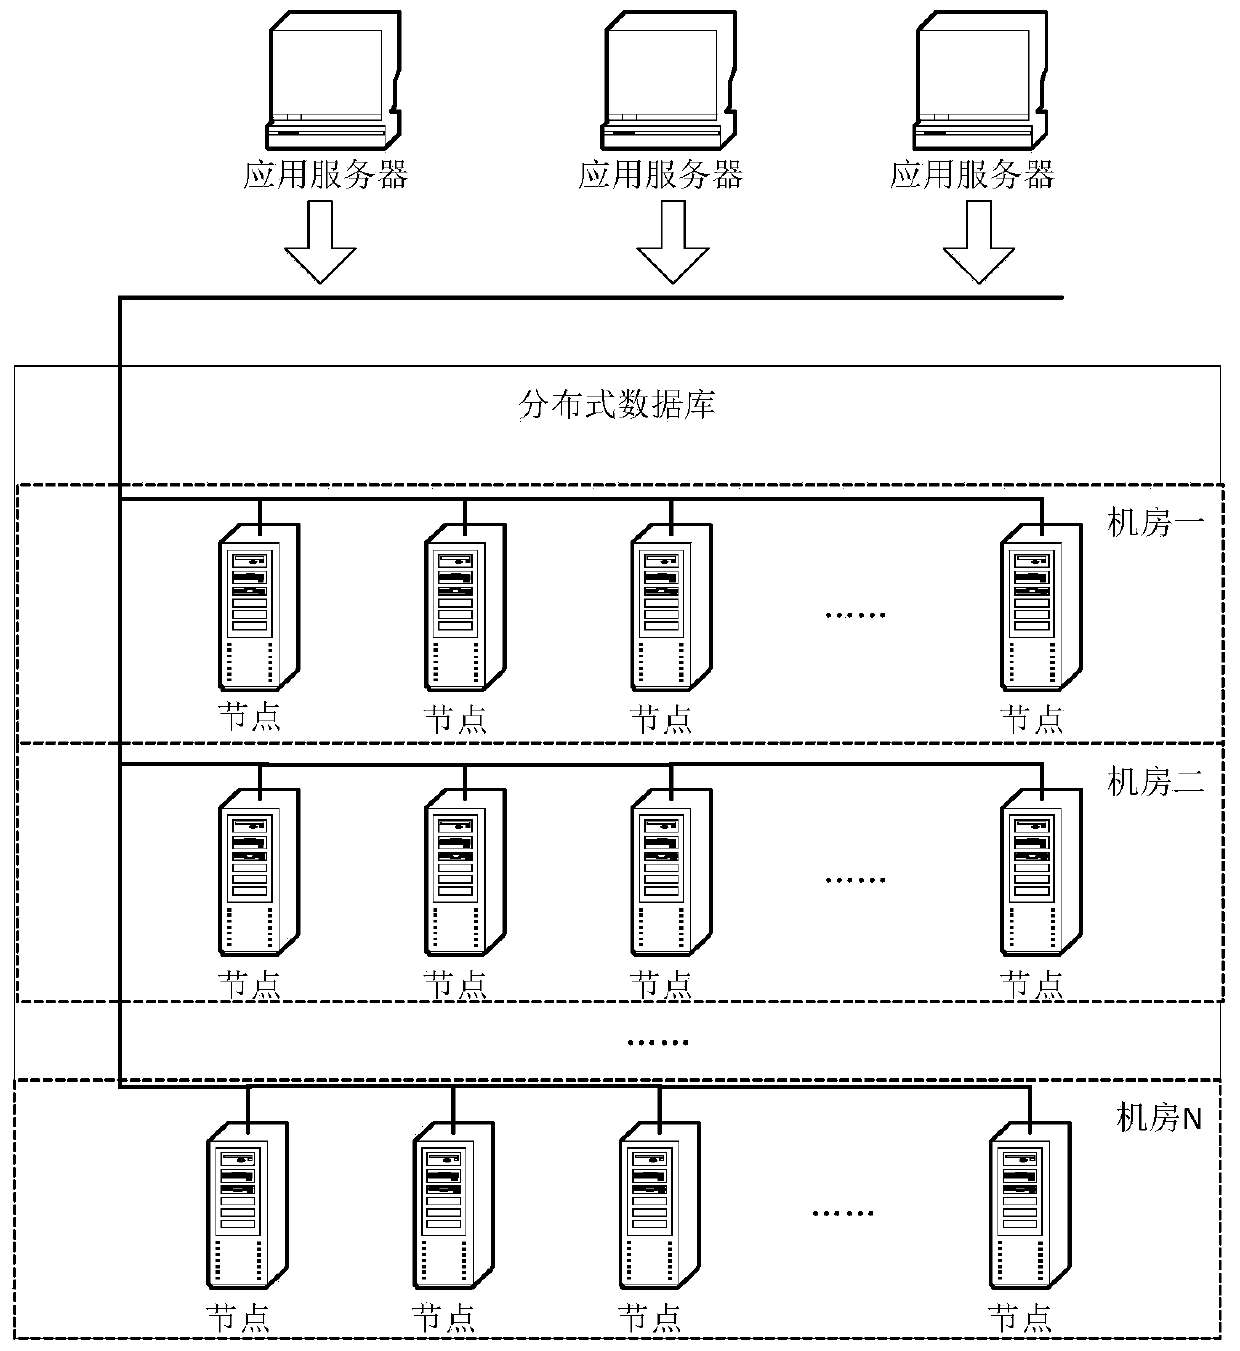 Concurrent access control method in distributed database system